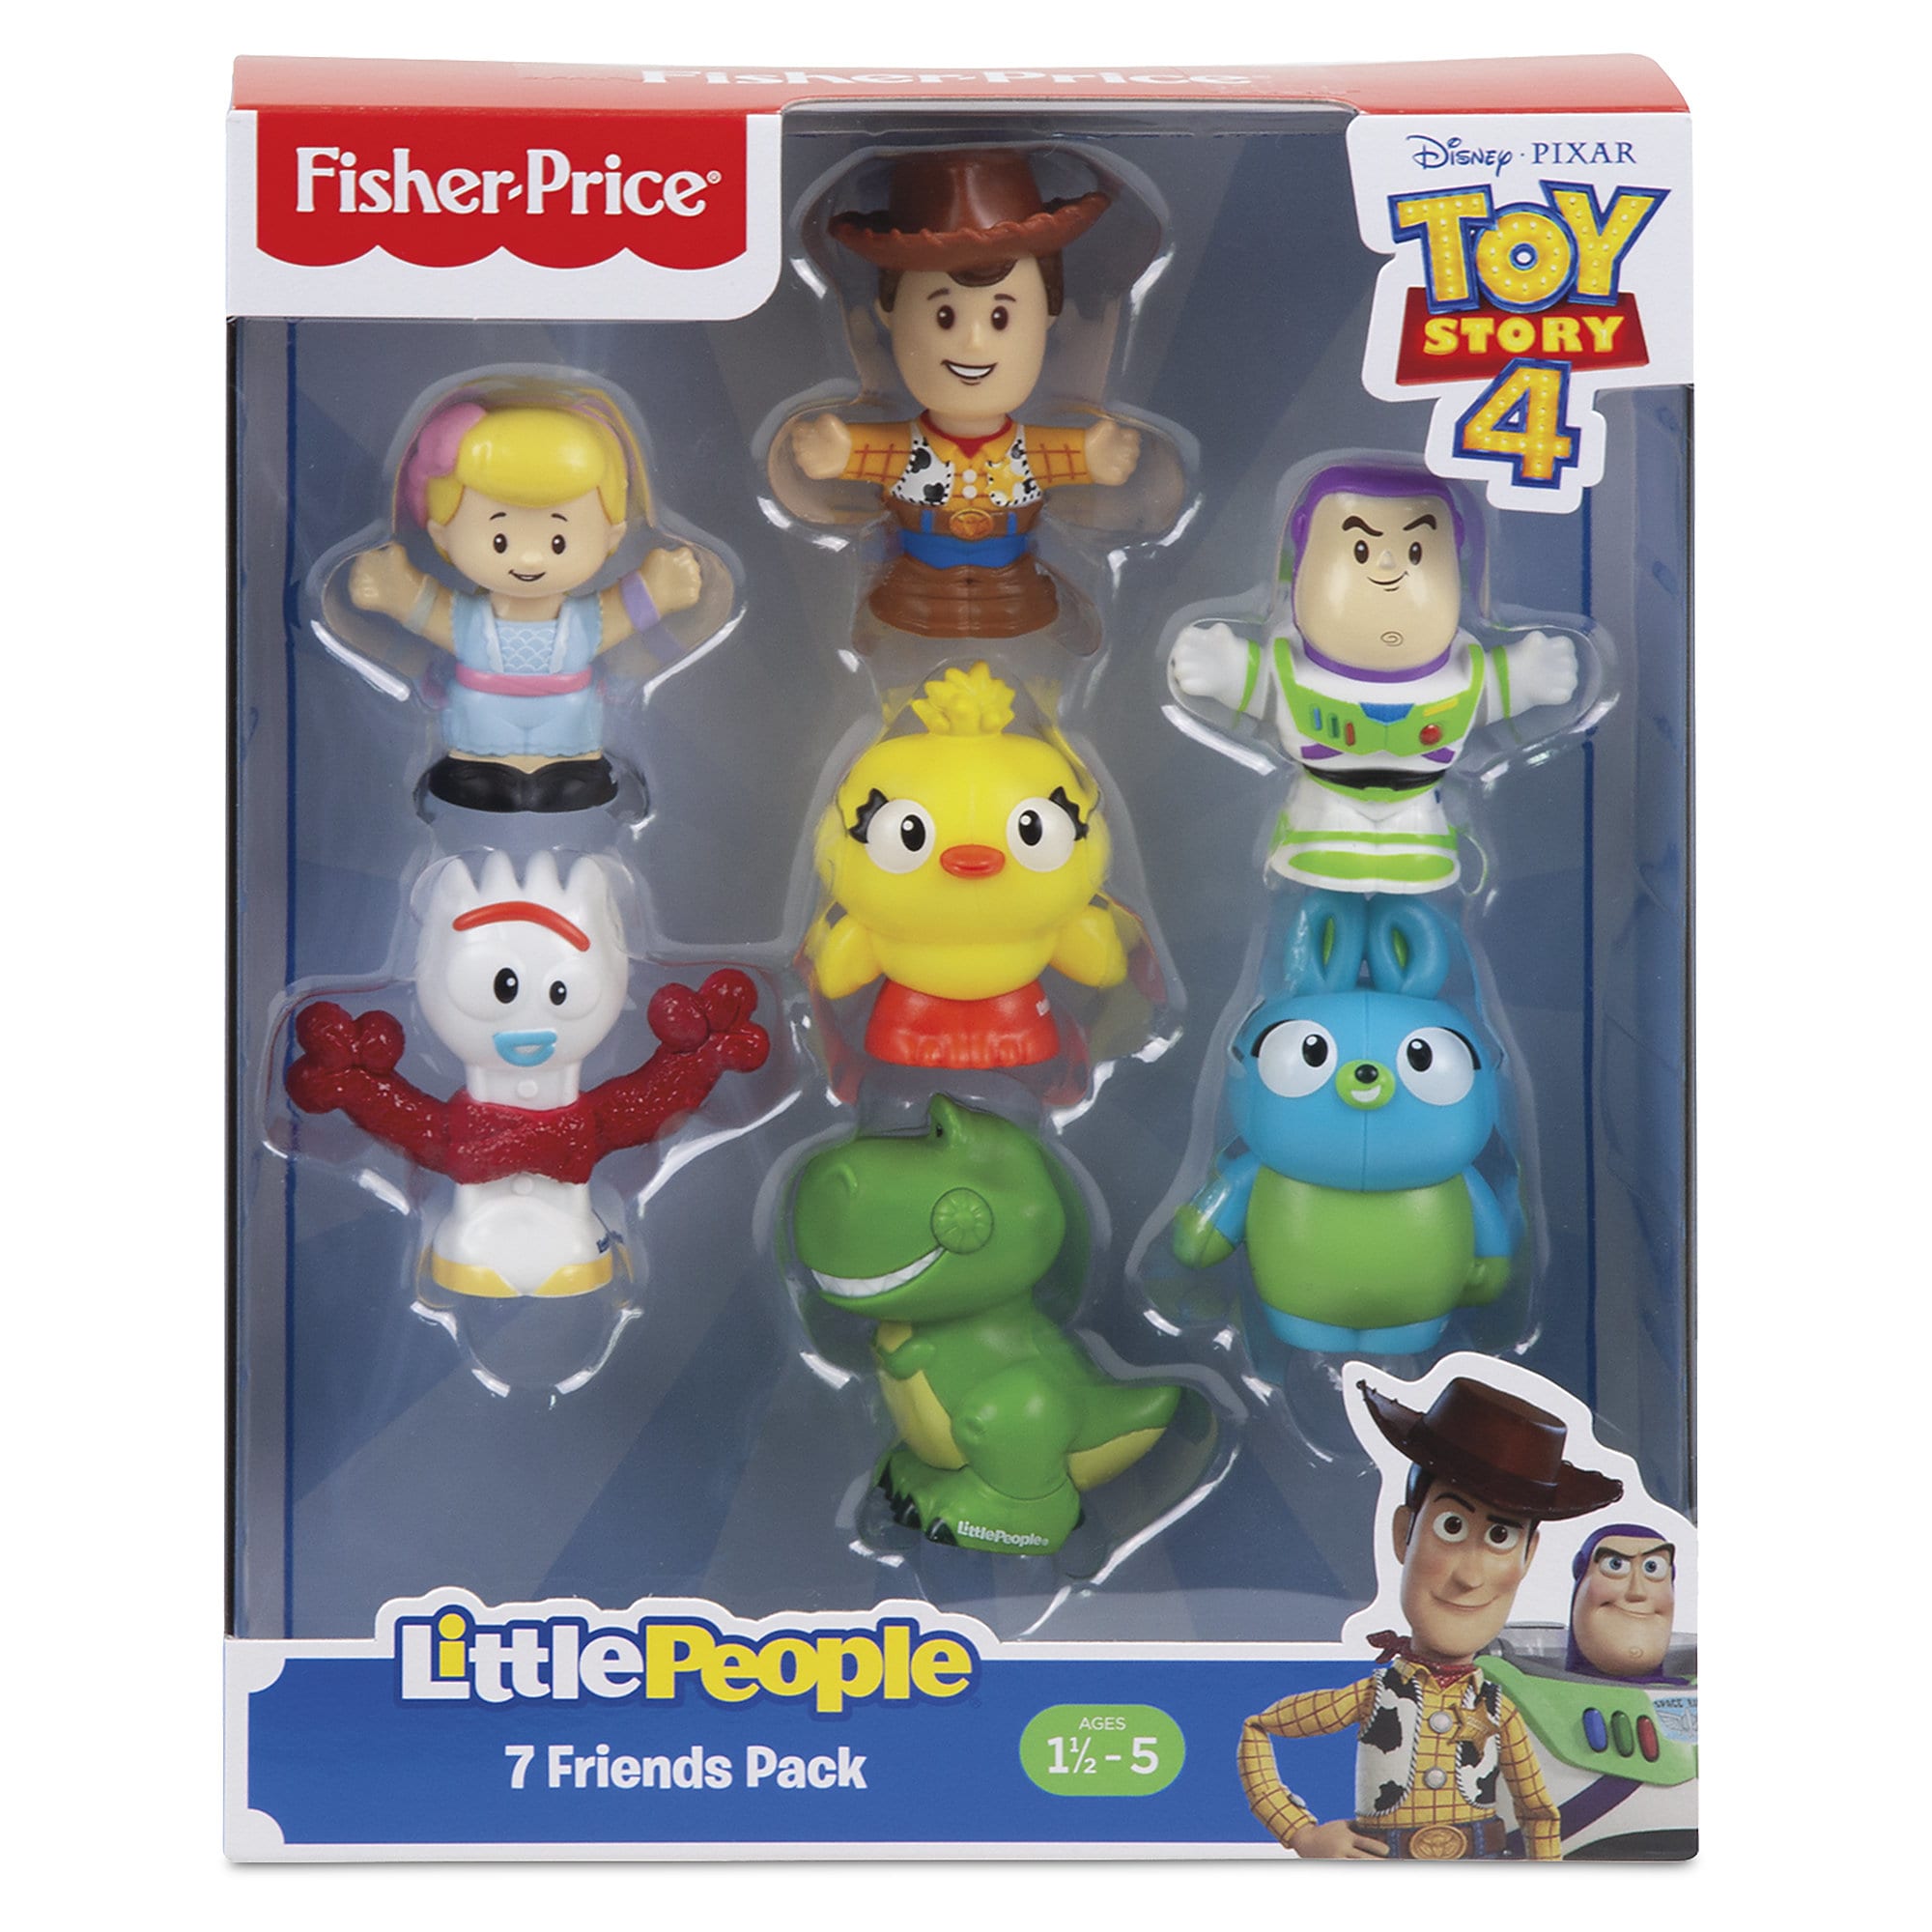 Toy Story 4 Figure Set by Little People is now available for purchase